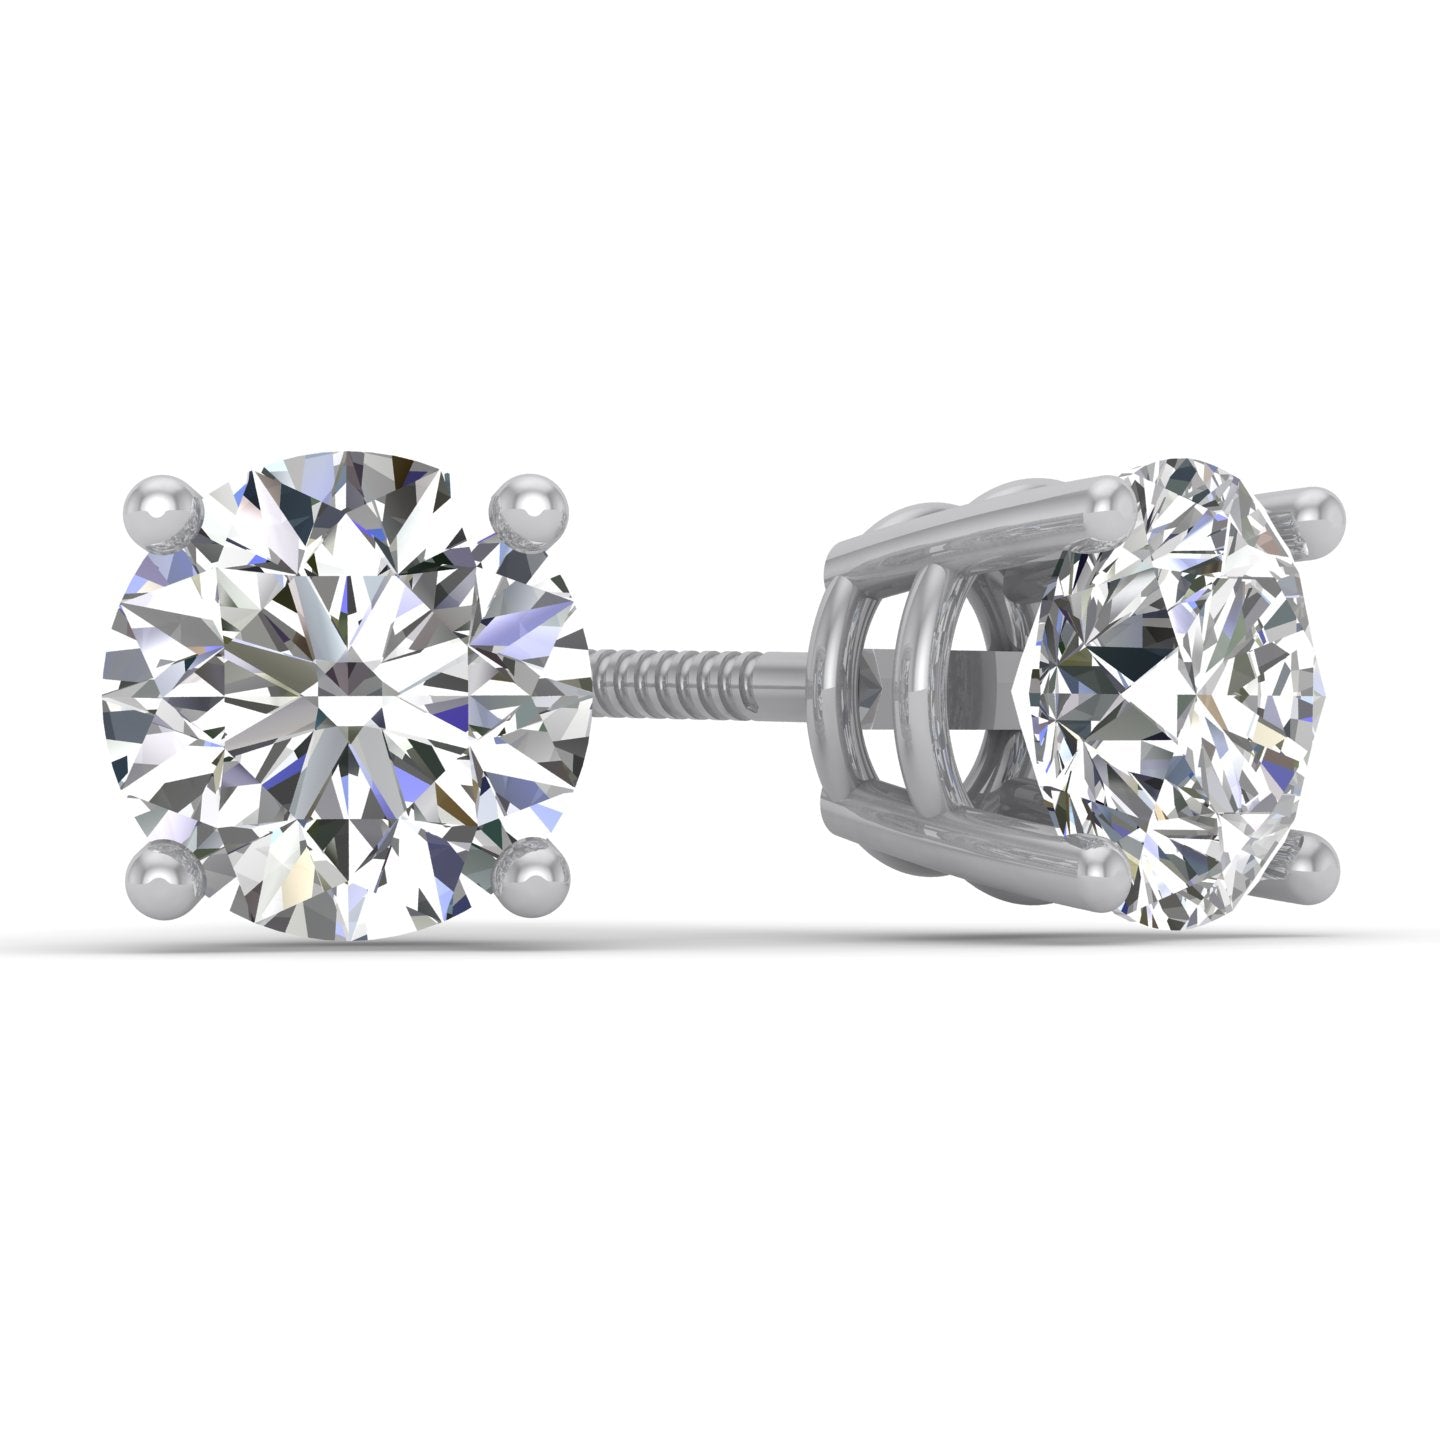   Essentials Certified 14K White Gold Diamond Stud Earring  with Screw Back and Post (0.25 cttw, J-K Color, I1-I2 Clarity) (previously   Collection) : Clothing, Shoes & Jewelry